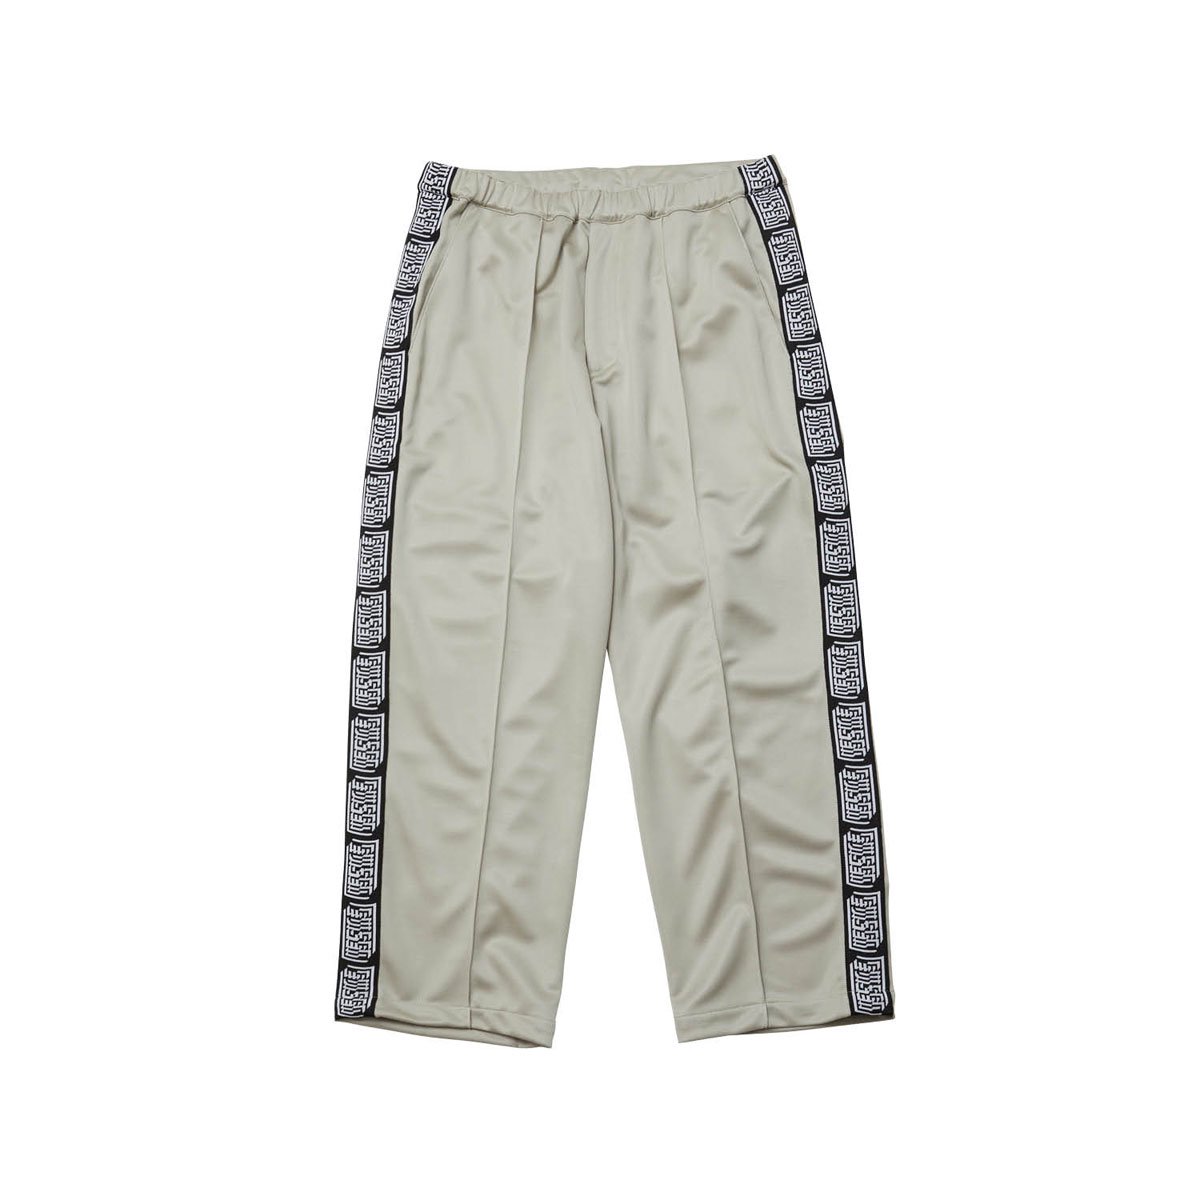 LIFTED TRACK PANTS - Evisen Skateboards ゑ